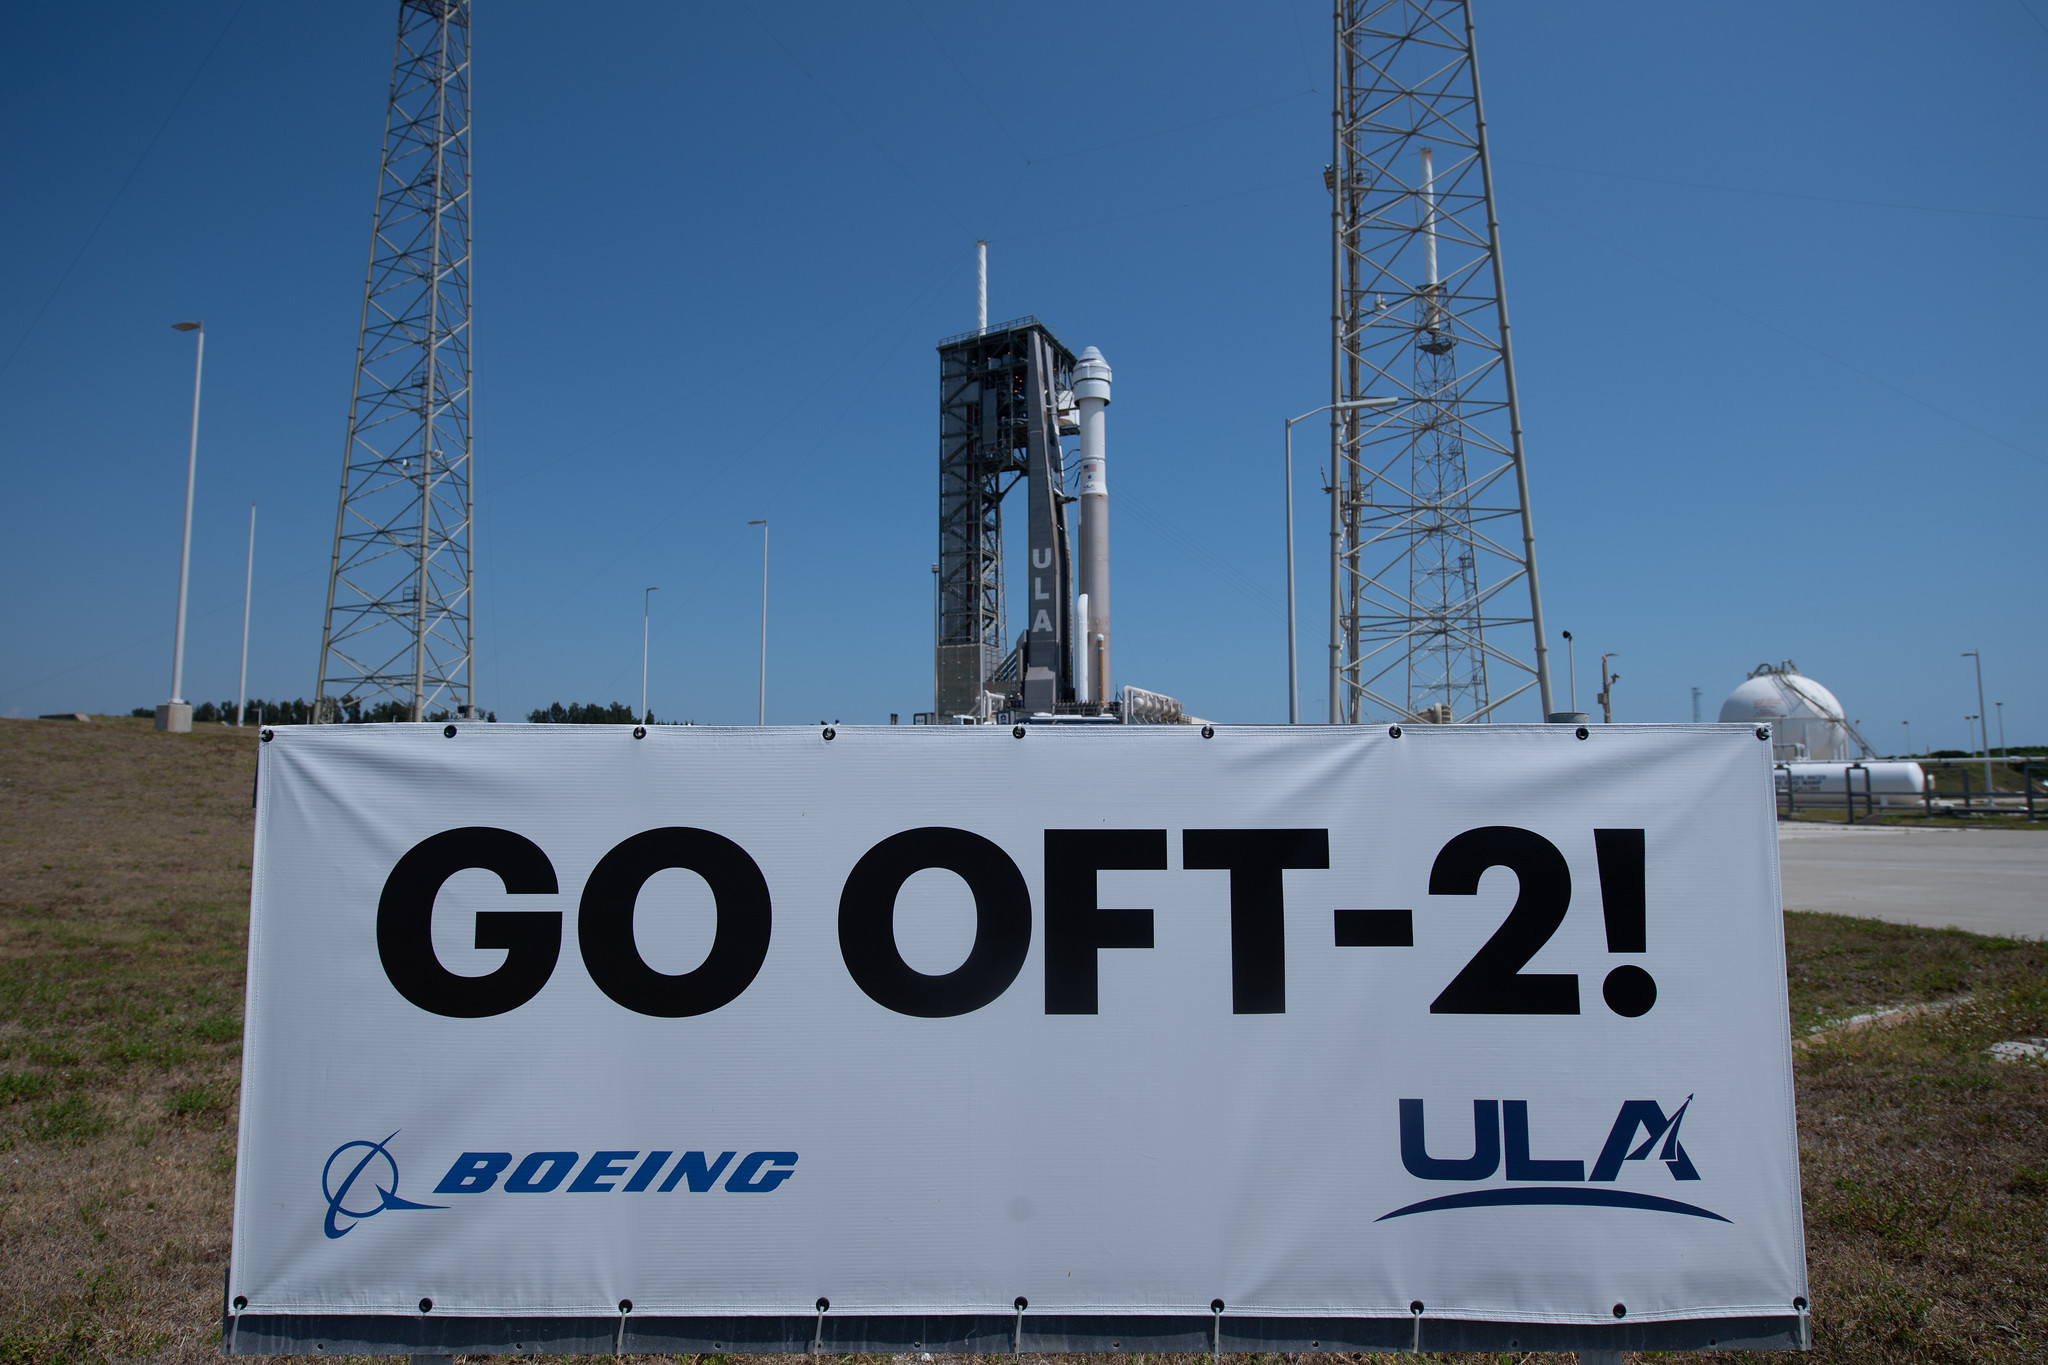 Boeing's Starliner OFT-2 spacecraft and its Atlas V rocket arrive at the launch pad on May 18, 2022.